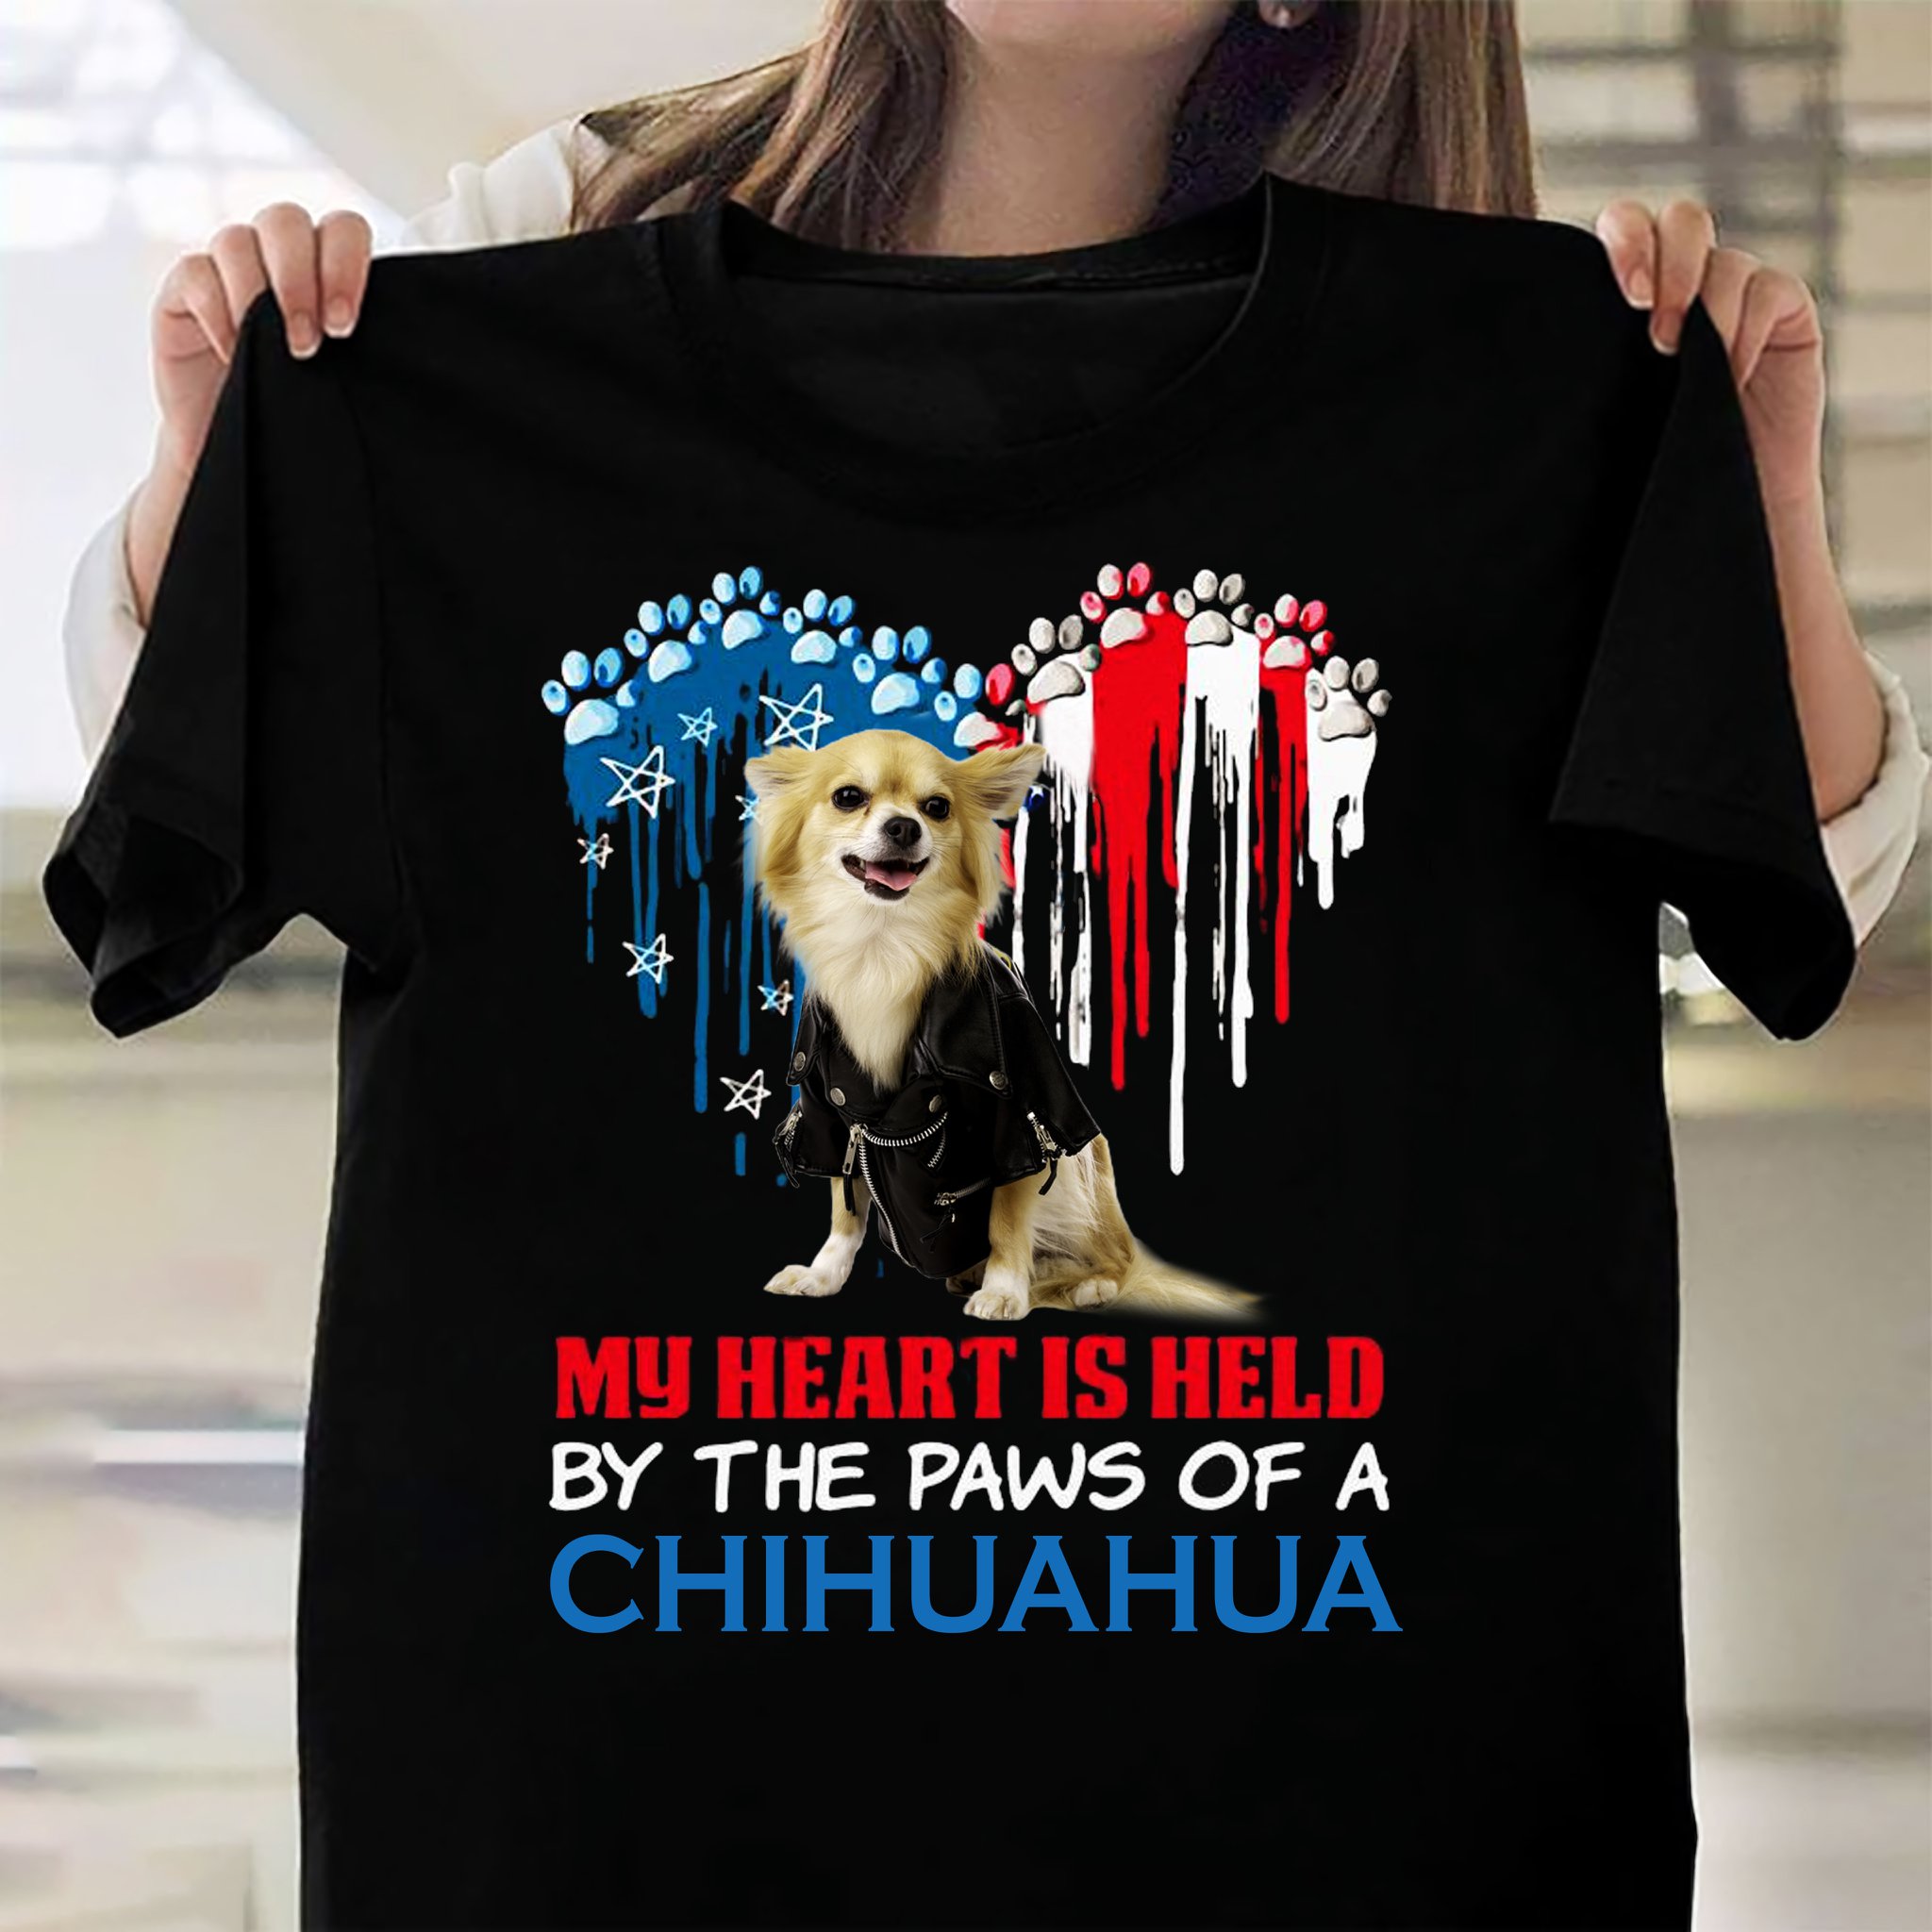 My heart is held by the paws of a Chihuahua - T-shirt for dog lover